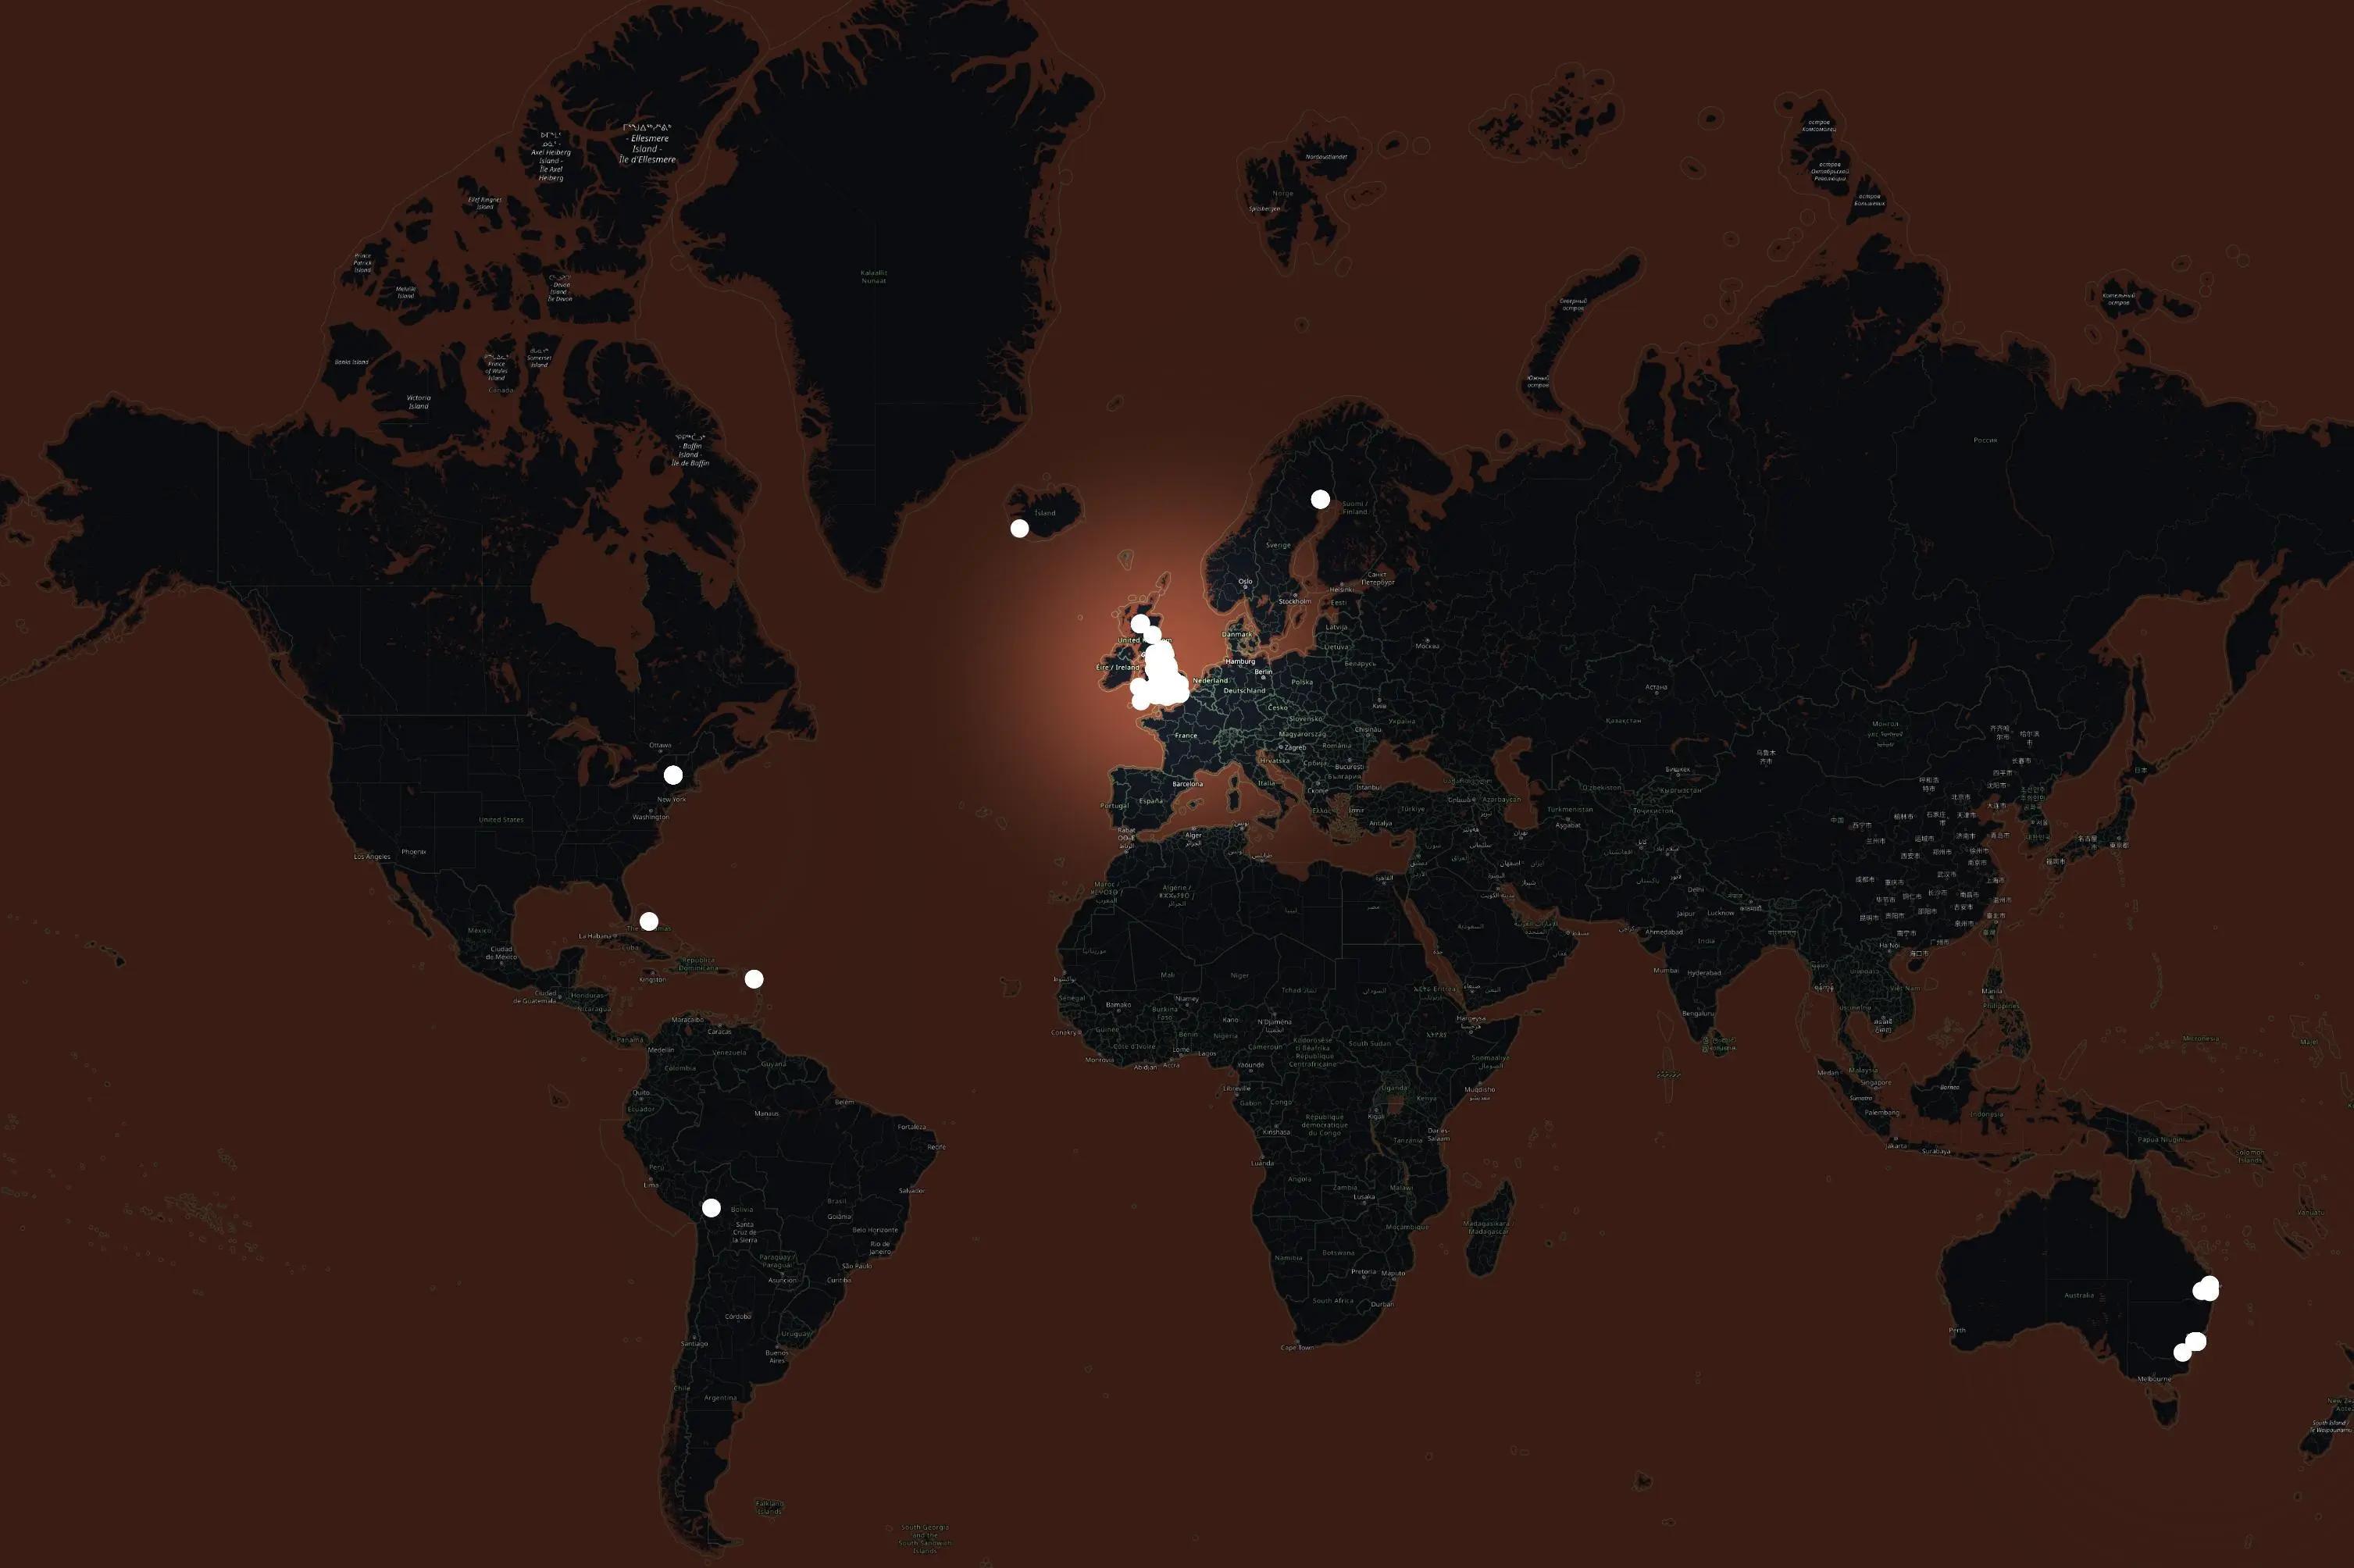 Light map showing the projects Sensat is working on around the world